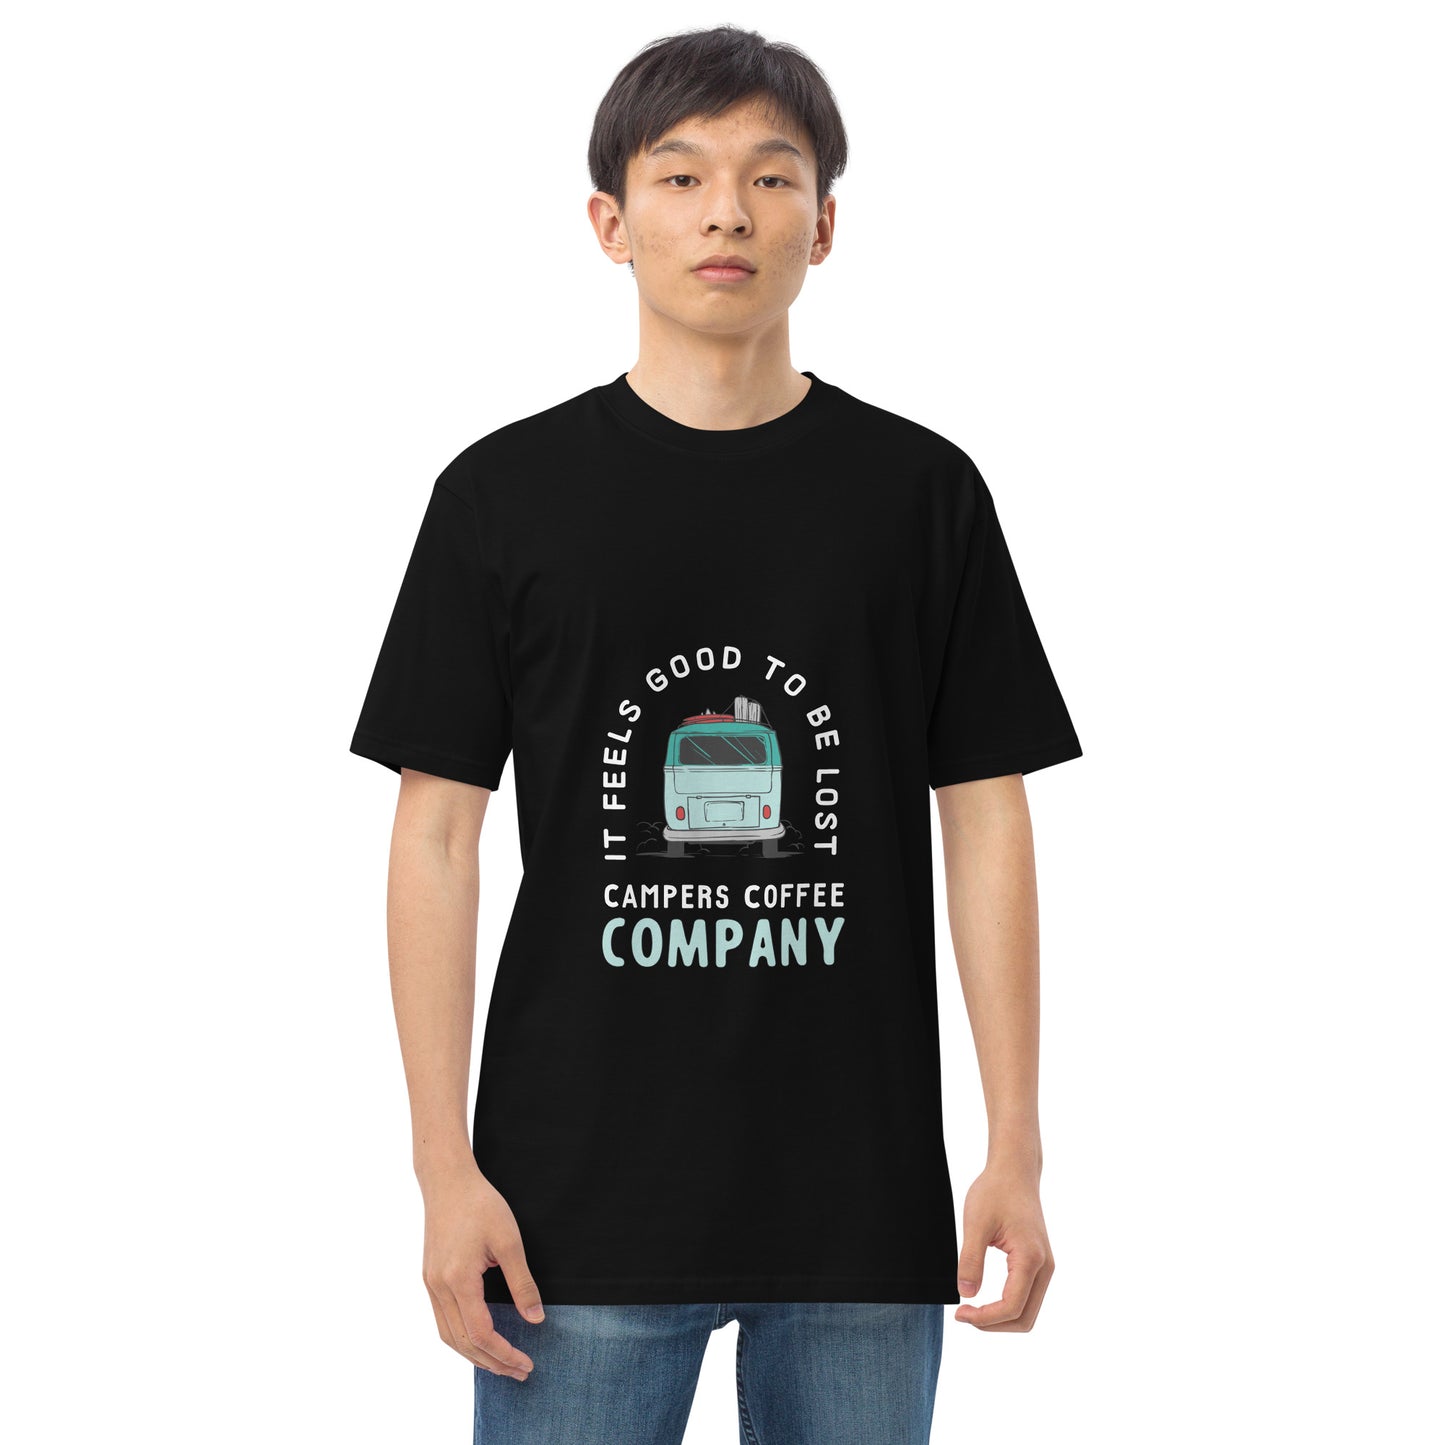 Campers Coffee Get lost shirt